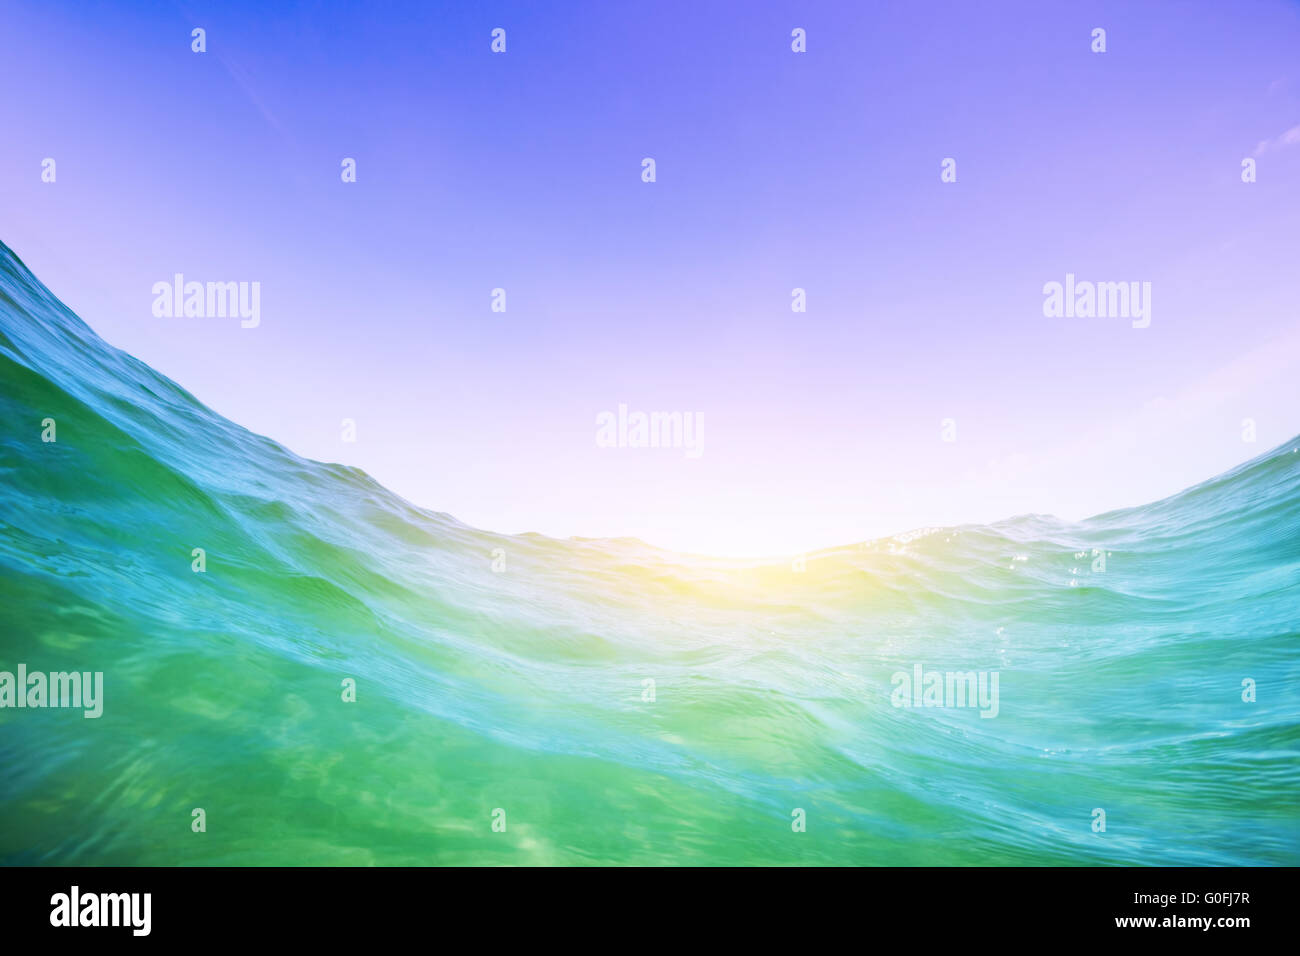 Dynamic water wave in the ocean. View from the waterline. Underwater and blue sunny sky. Stock Photo